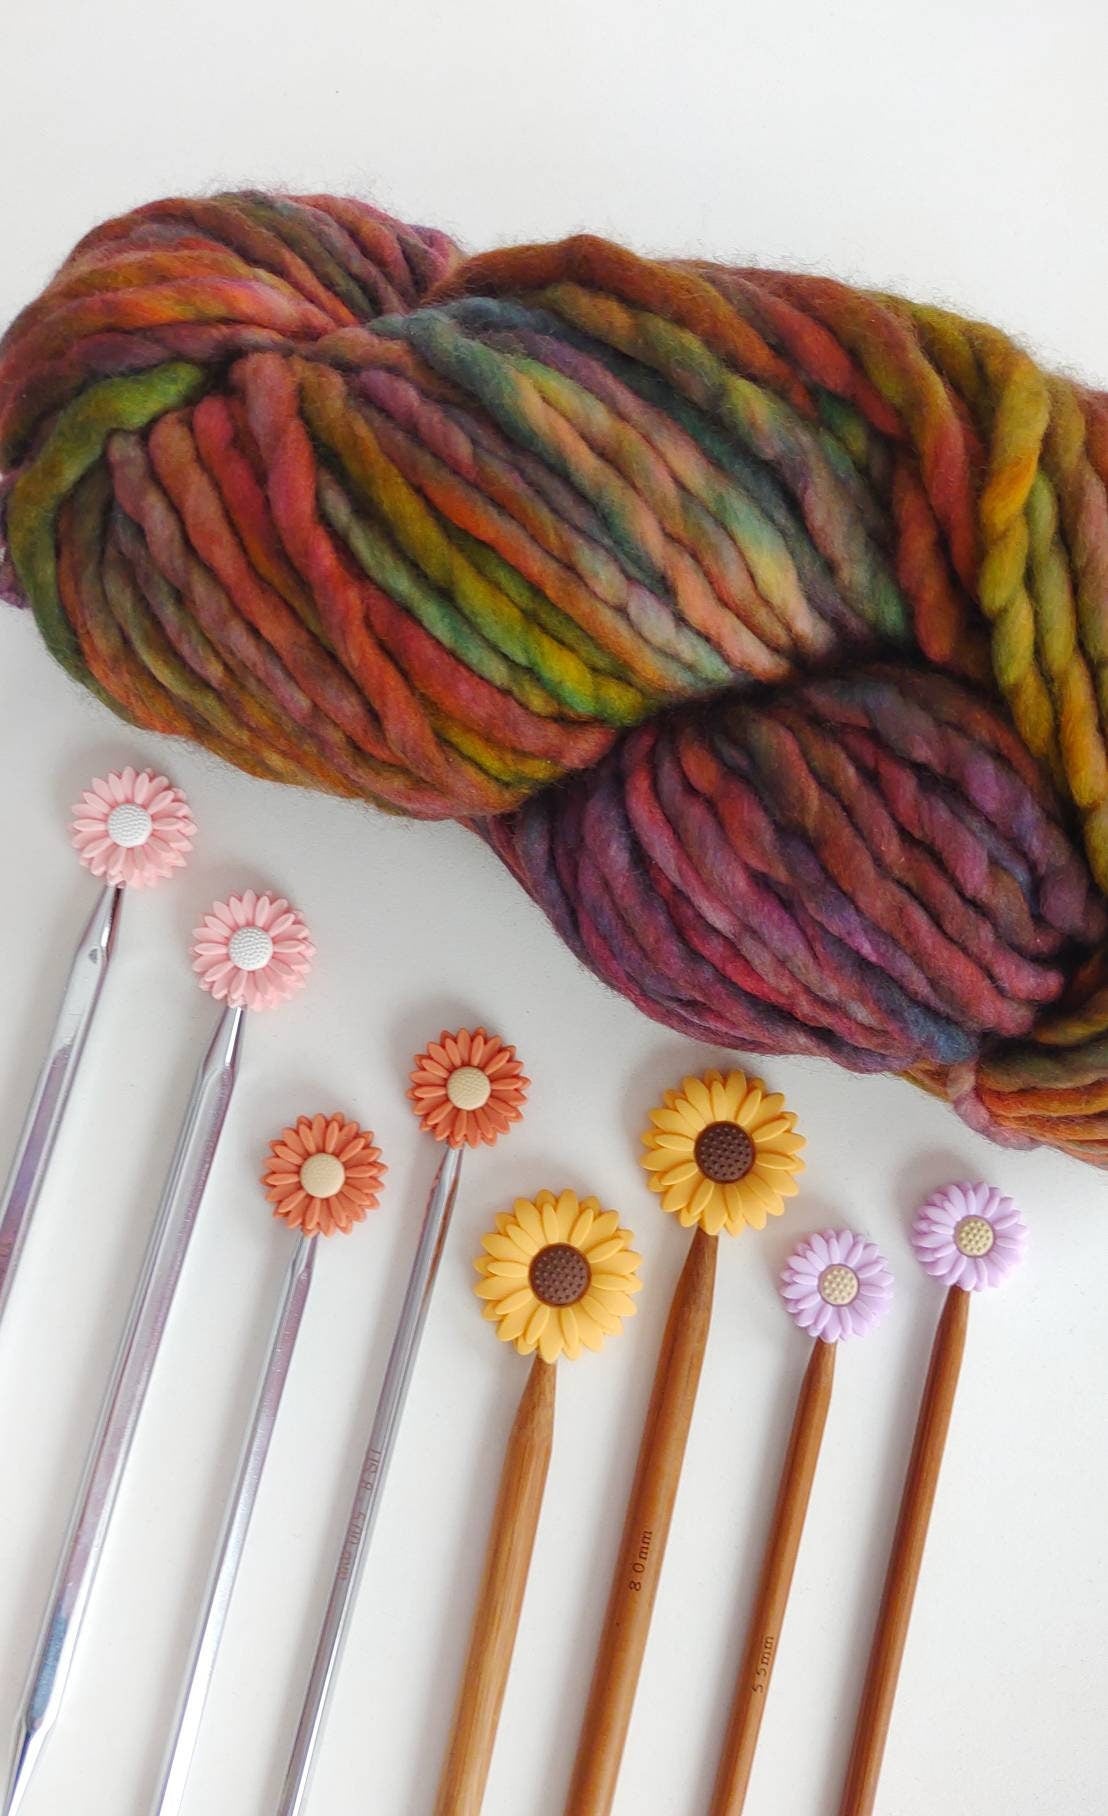 Boho Daisy Knitting Needle Stitch Stoppers. Needle Protectors. Knitting Needle Stoppers. Knitting Notions, Accessories, Supplies, Tools.